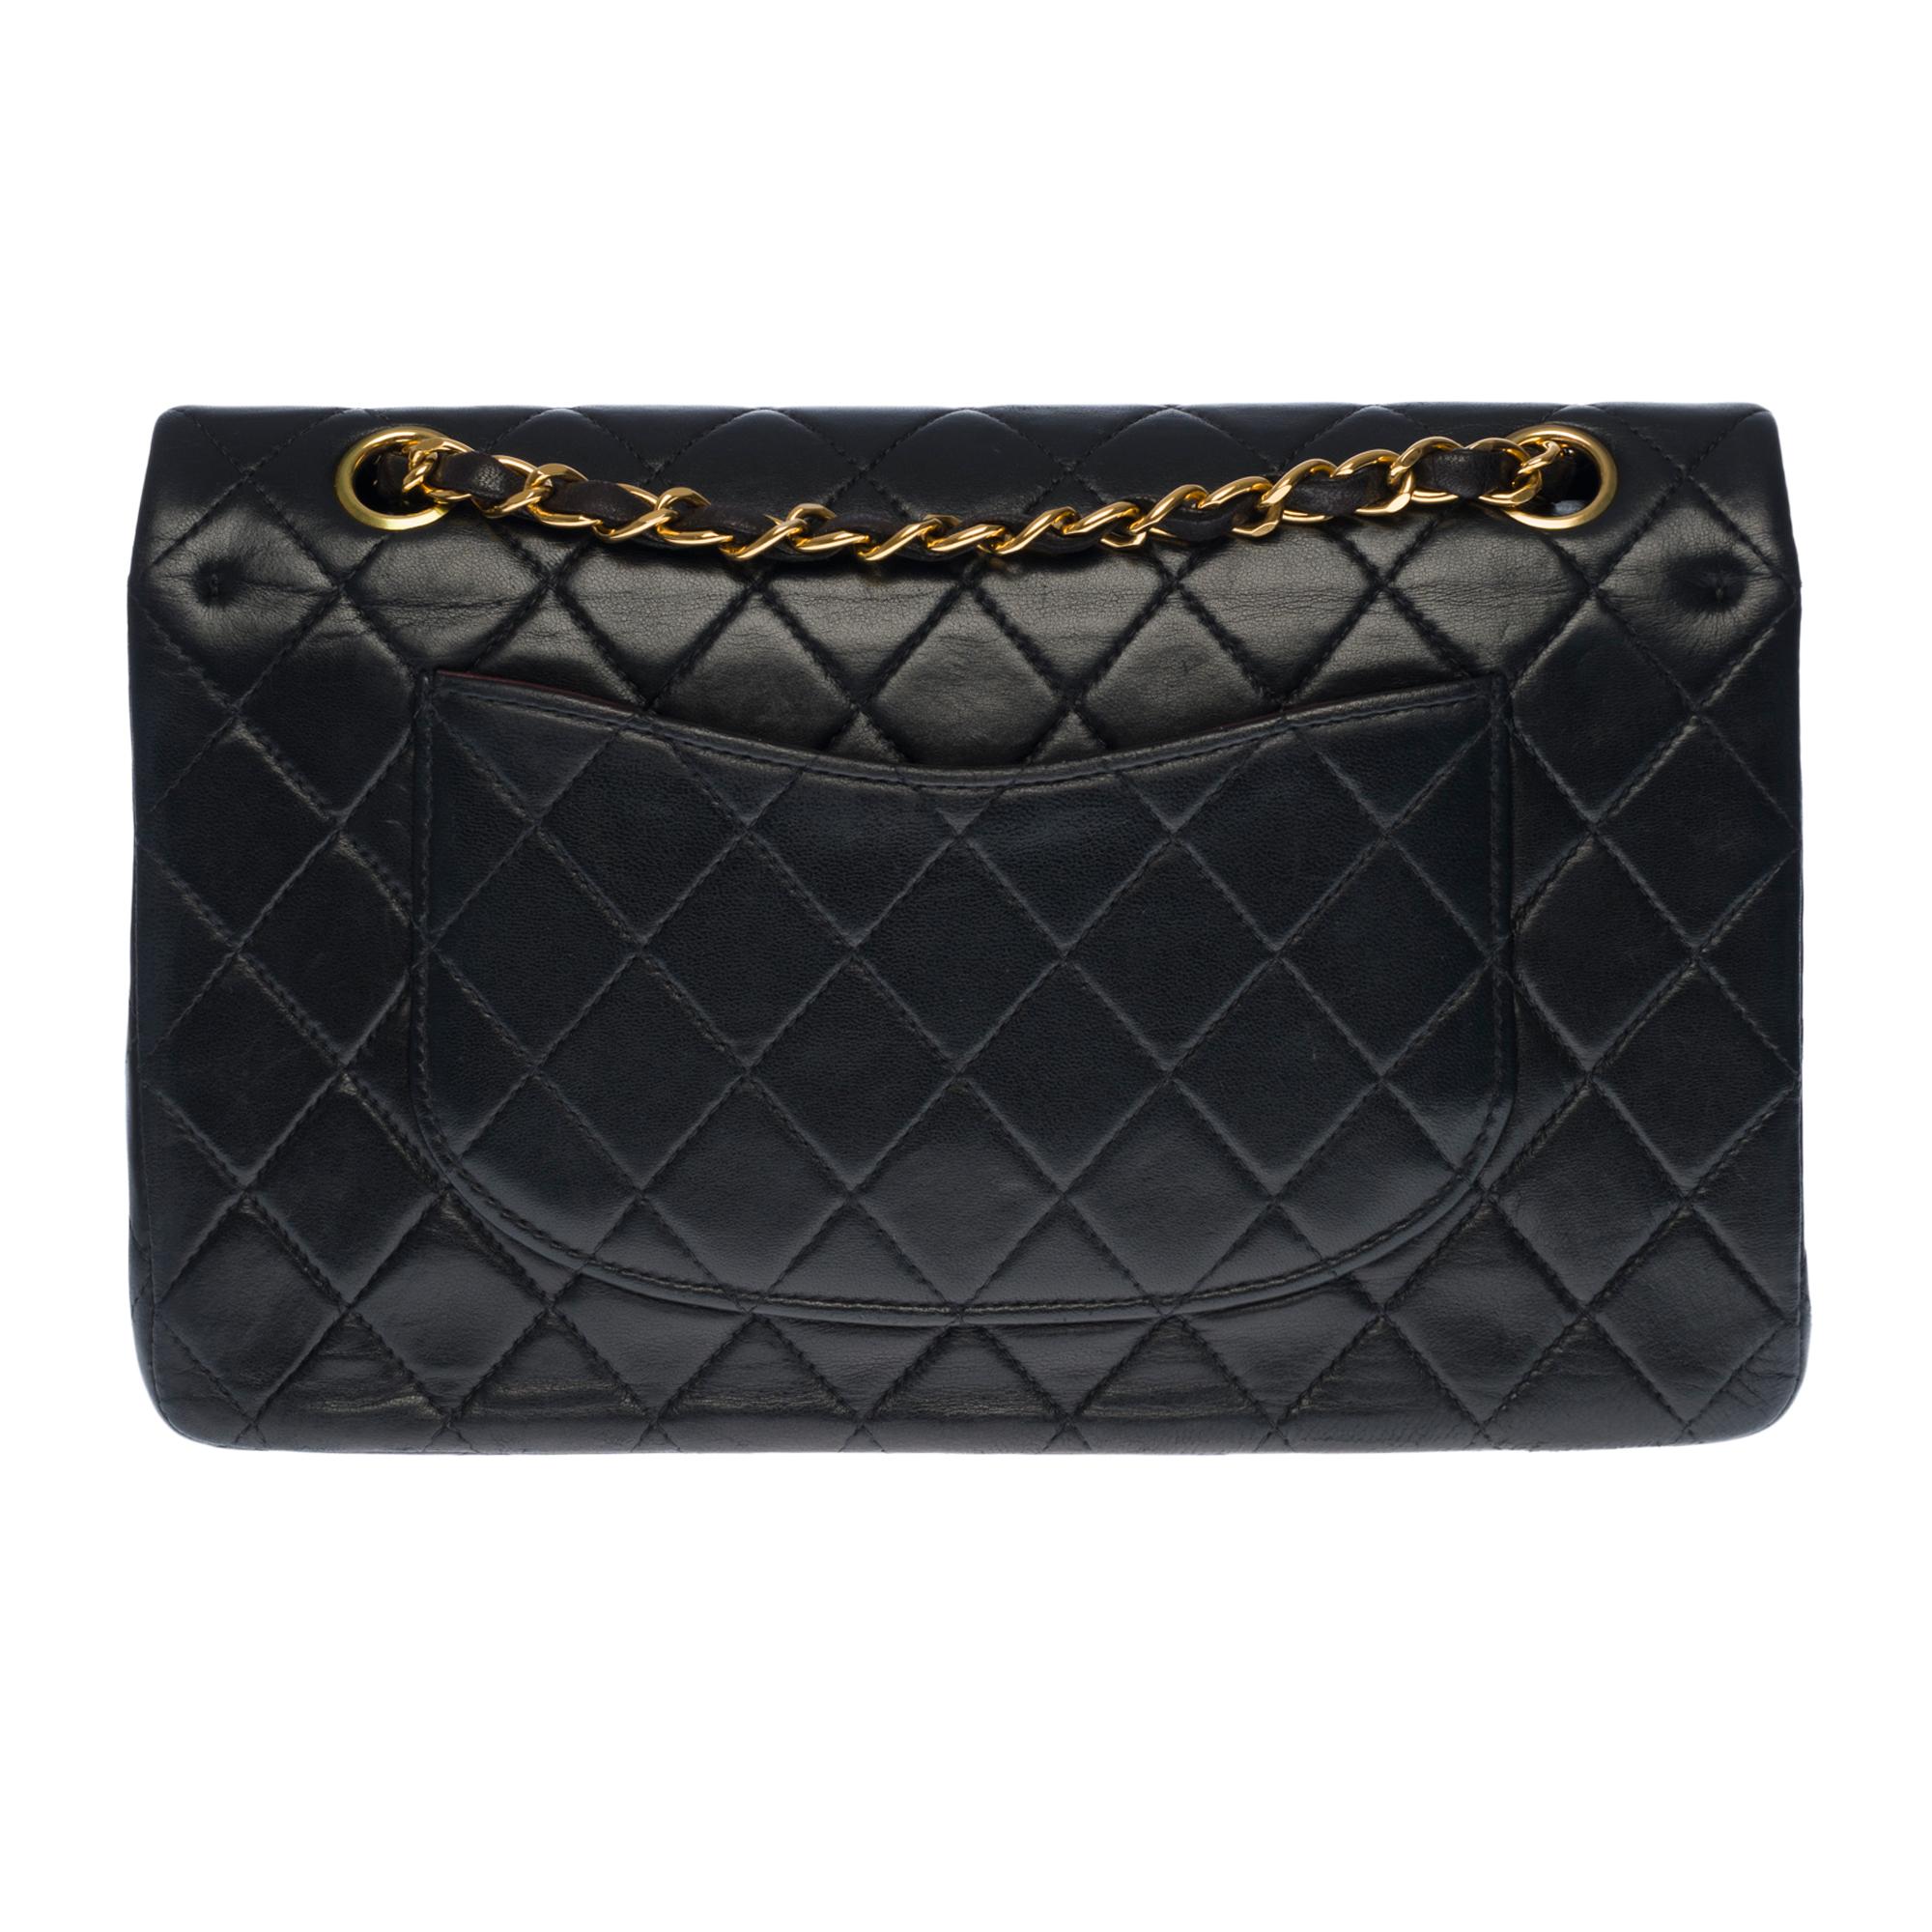 Beautiful Chanel Timeless Medium 25cm handbag with double flap in black quilted lambskin leather, gold-tone metal hardware, a gold-tone metal chain handle interwoven with black leather allowing a hand or shoulder support

Closure with gold metal